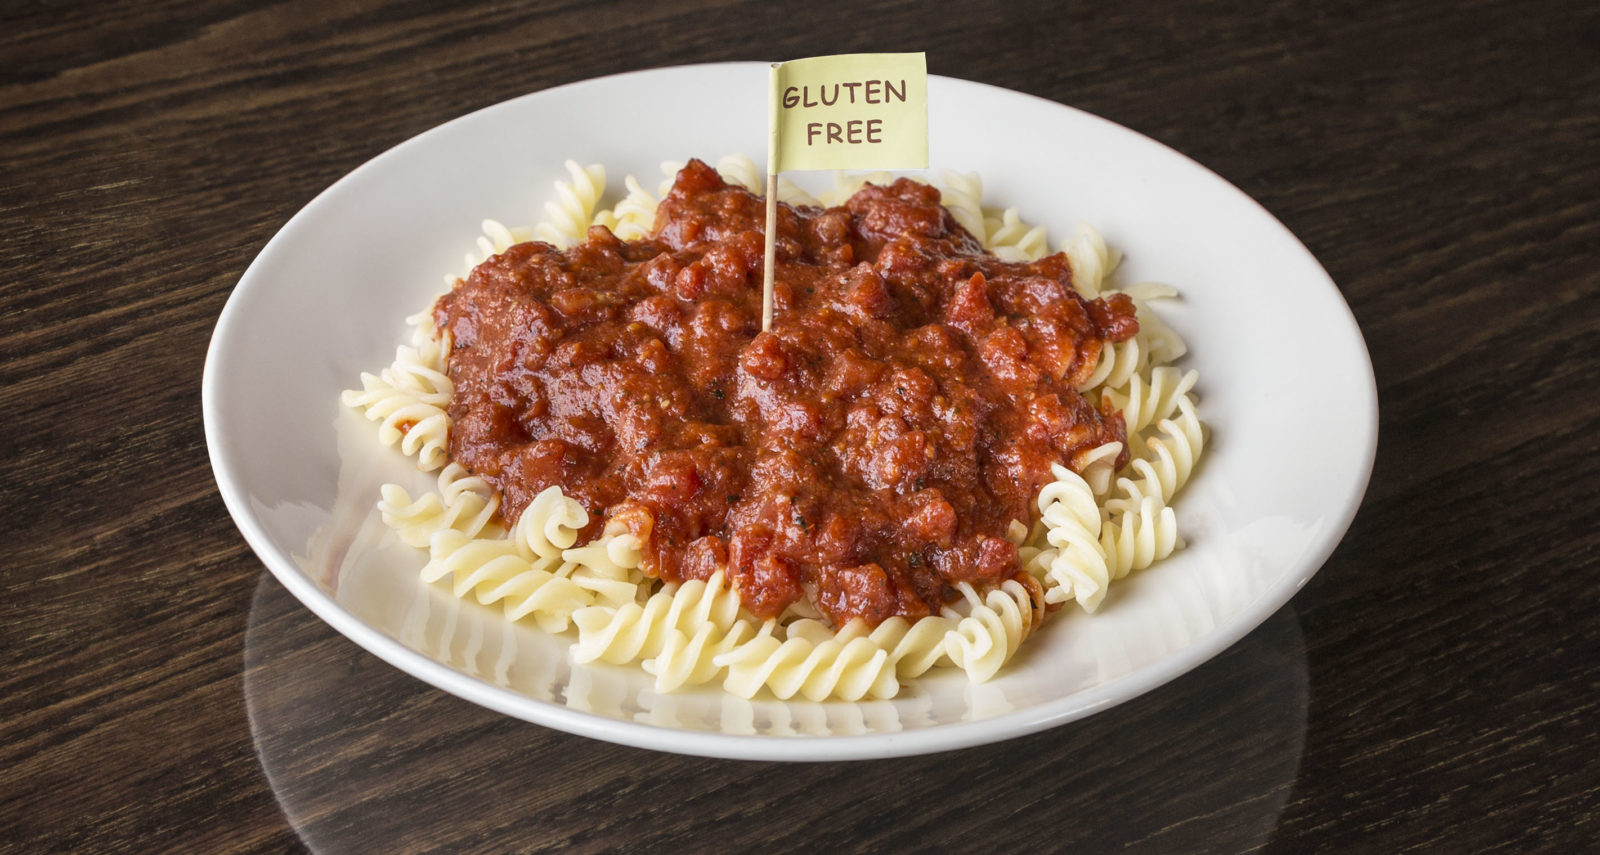 plate of gluten free pasta with "Gluten Free" flag.